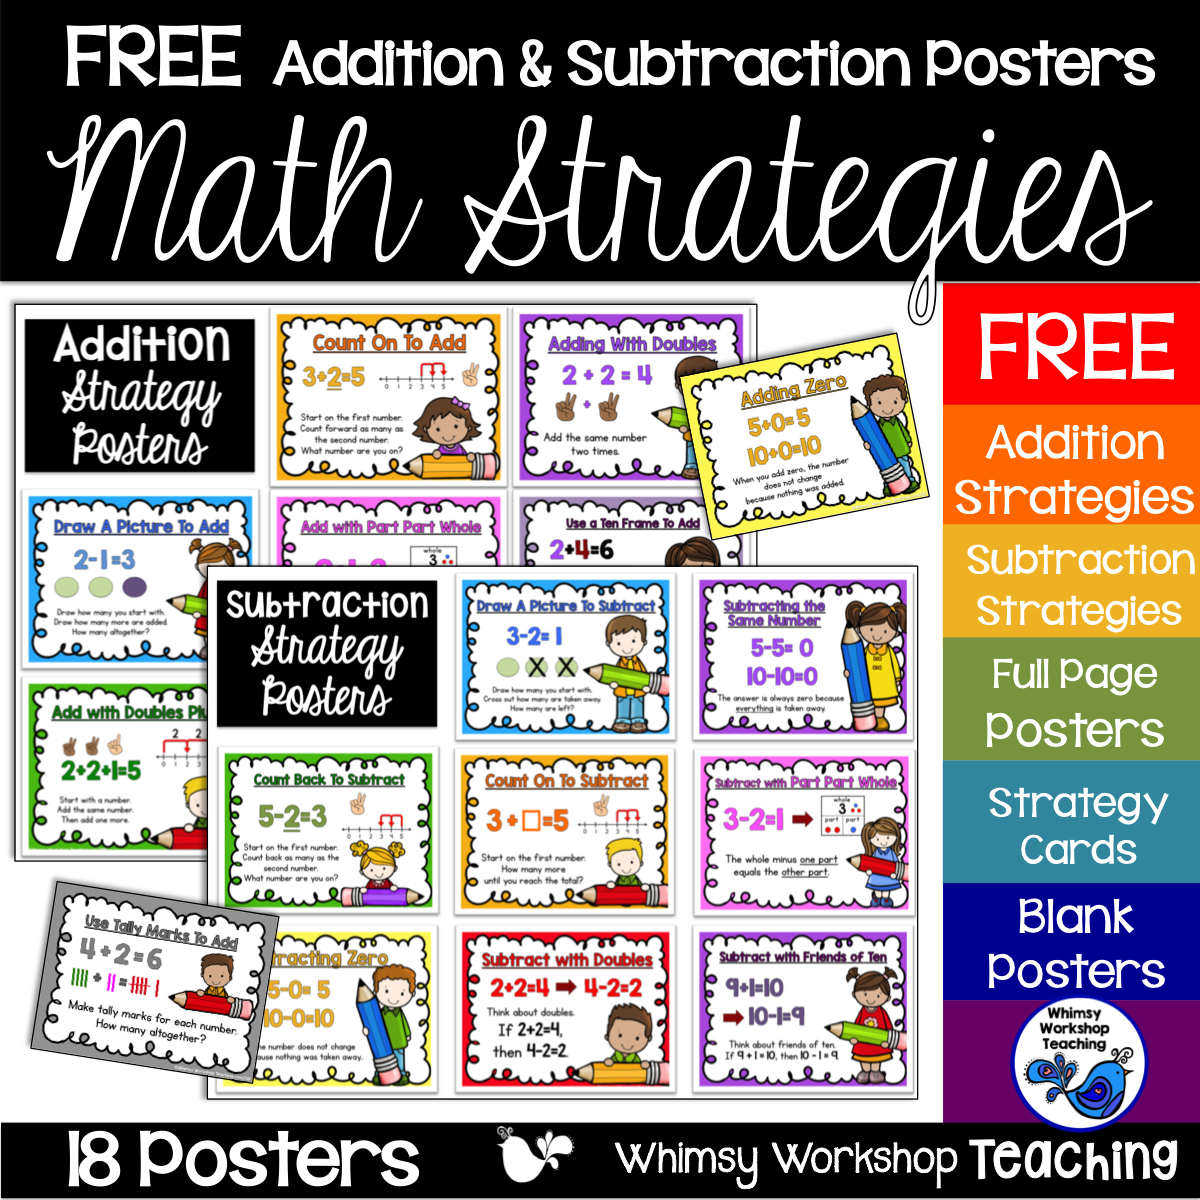 free-math-strategy-posters-for-addition-and-subtraction-whimsy